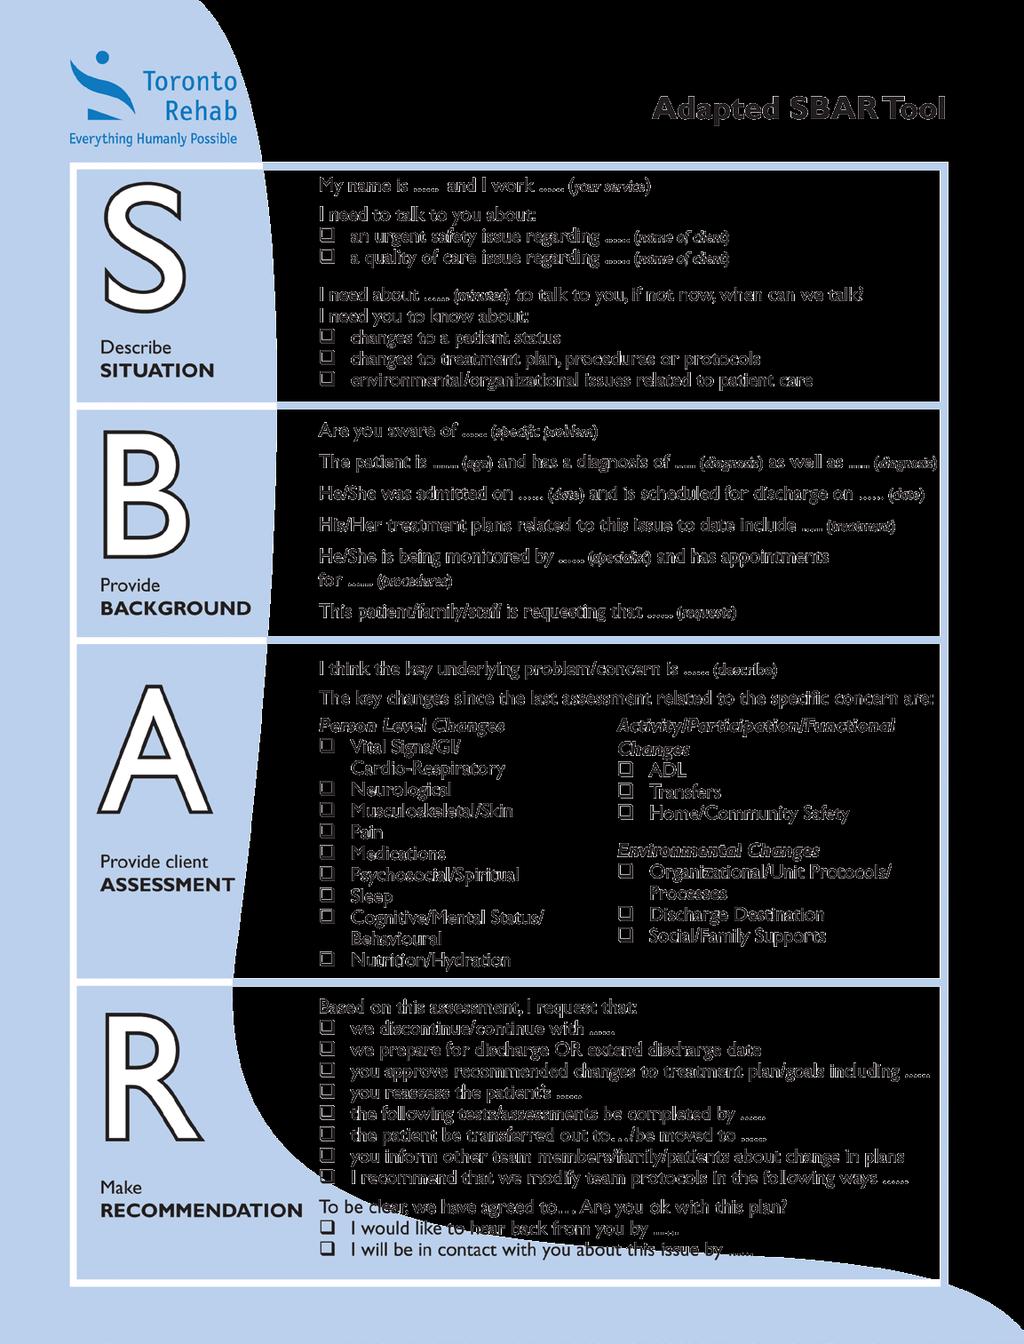 Angie Andreoli et al. Using SBAR to Communicate Falls Risk and Management in Inter-professional Rehabilitation Teams tion and communication.